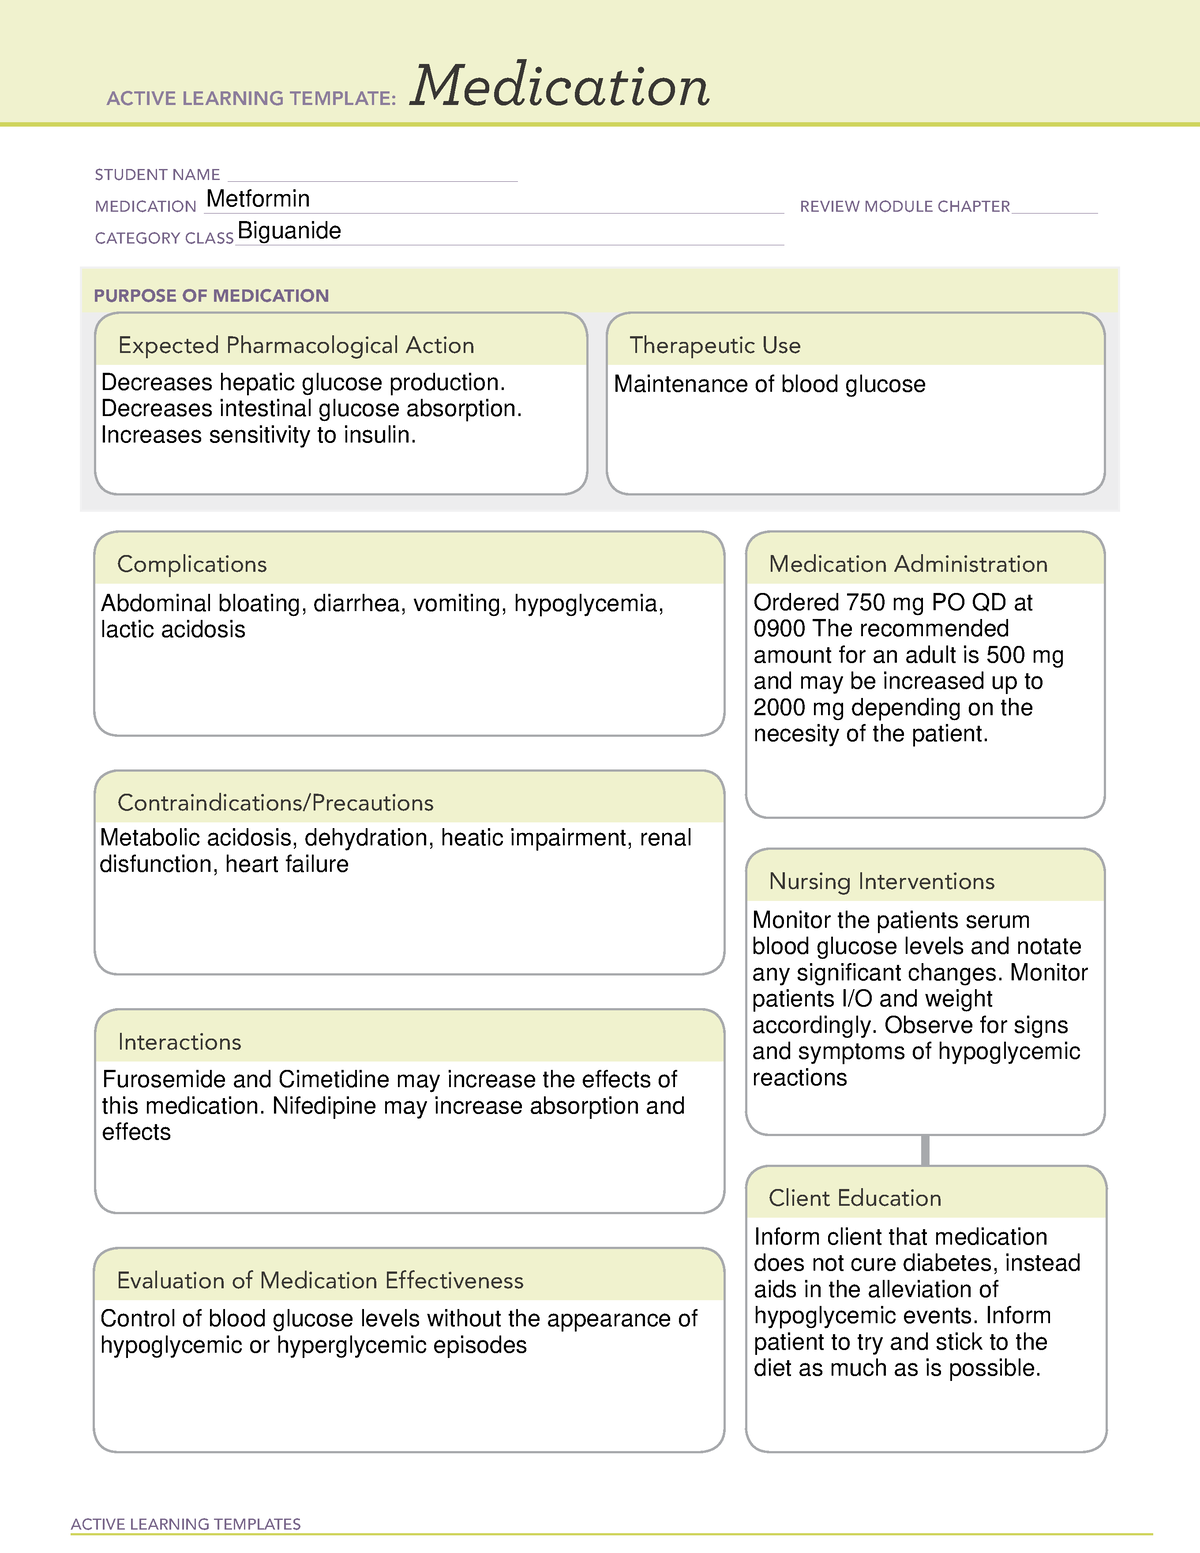 metformin-med-card-active-learning-templates-medication-student-name